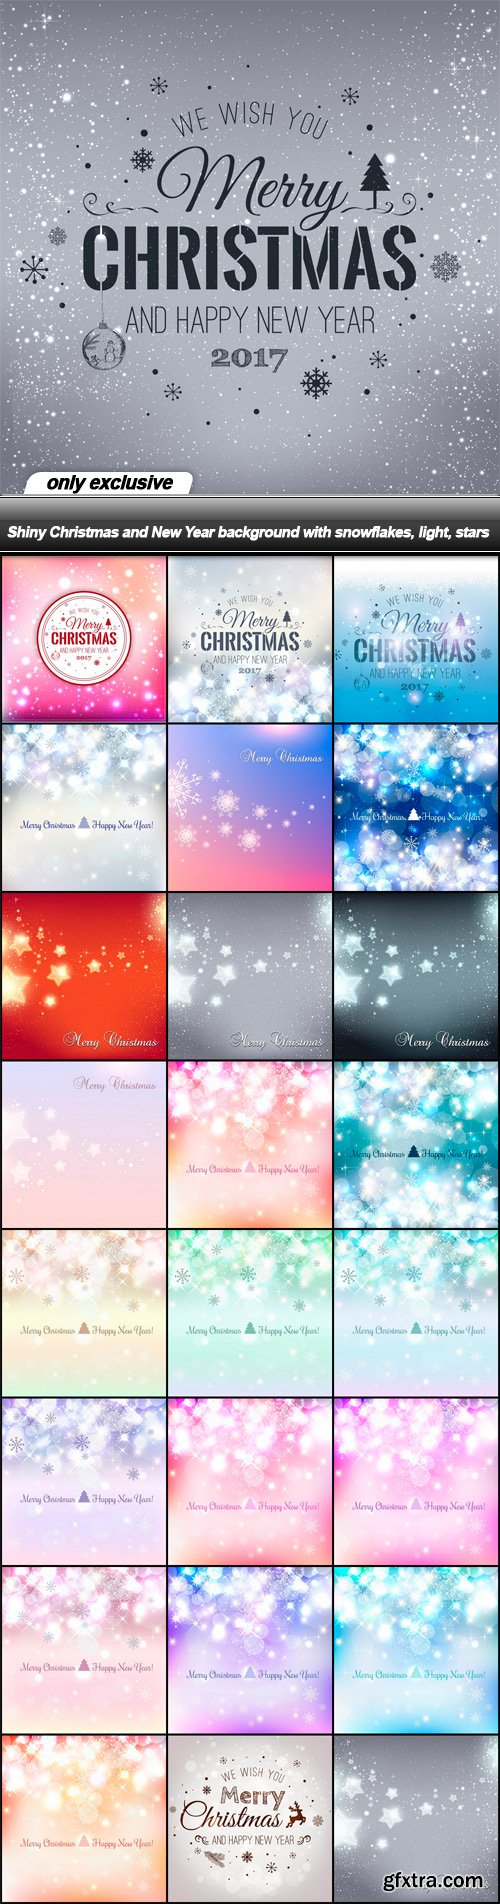 Shiny Christmas and New Year background with snowflakes, light, stars - 25 EPS